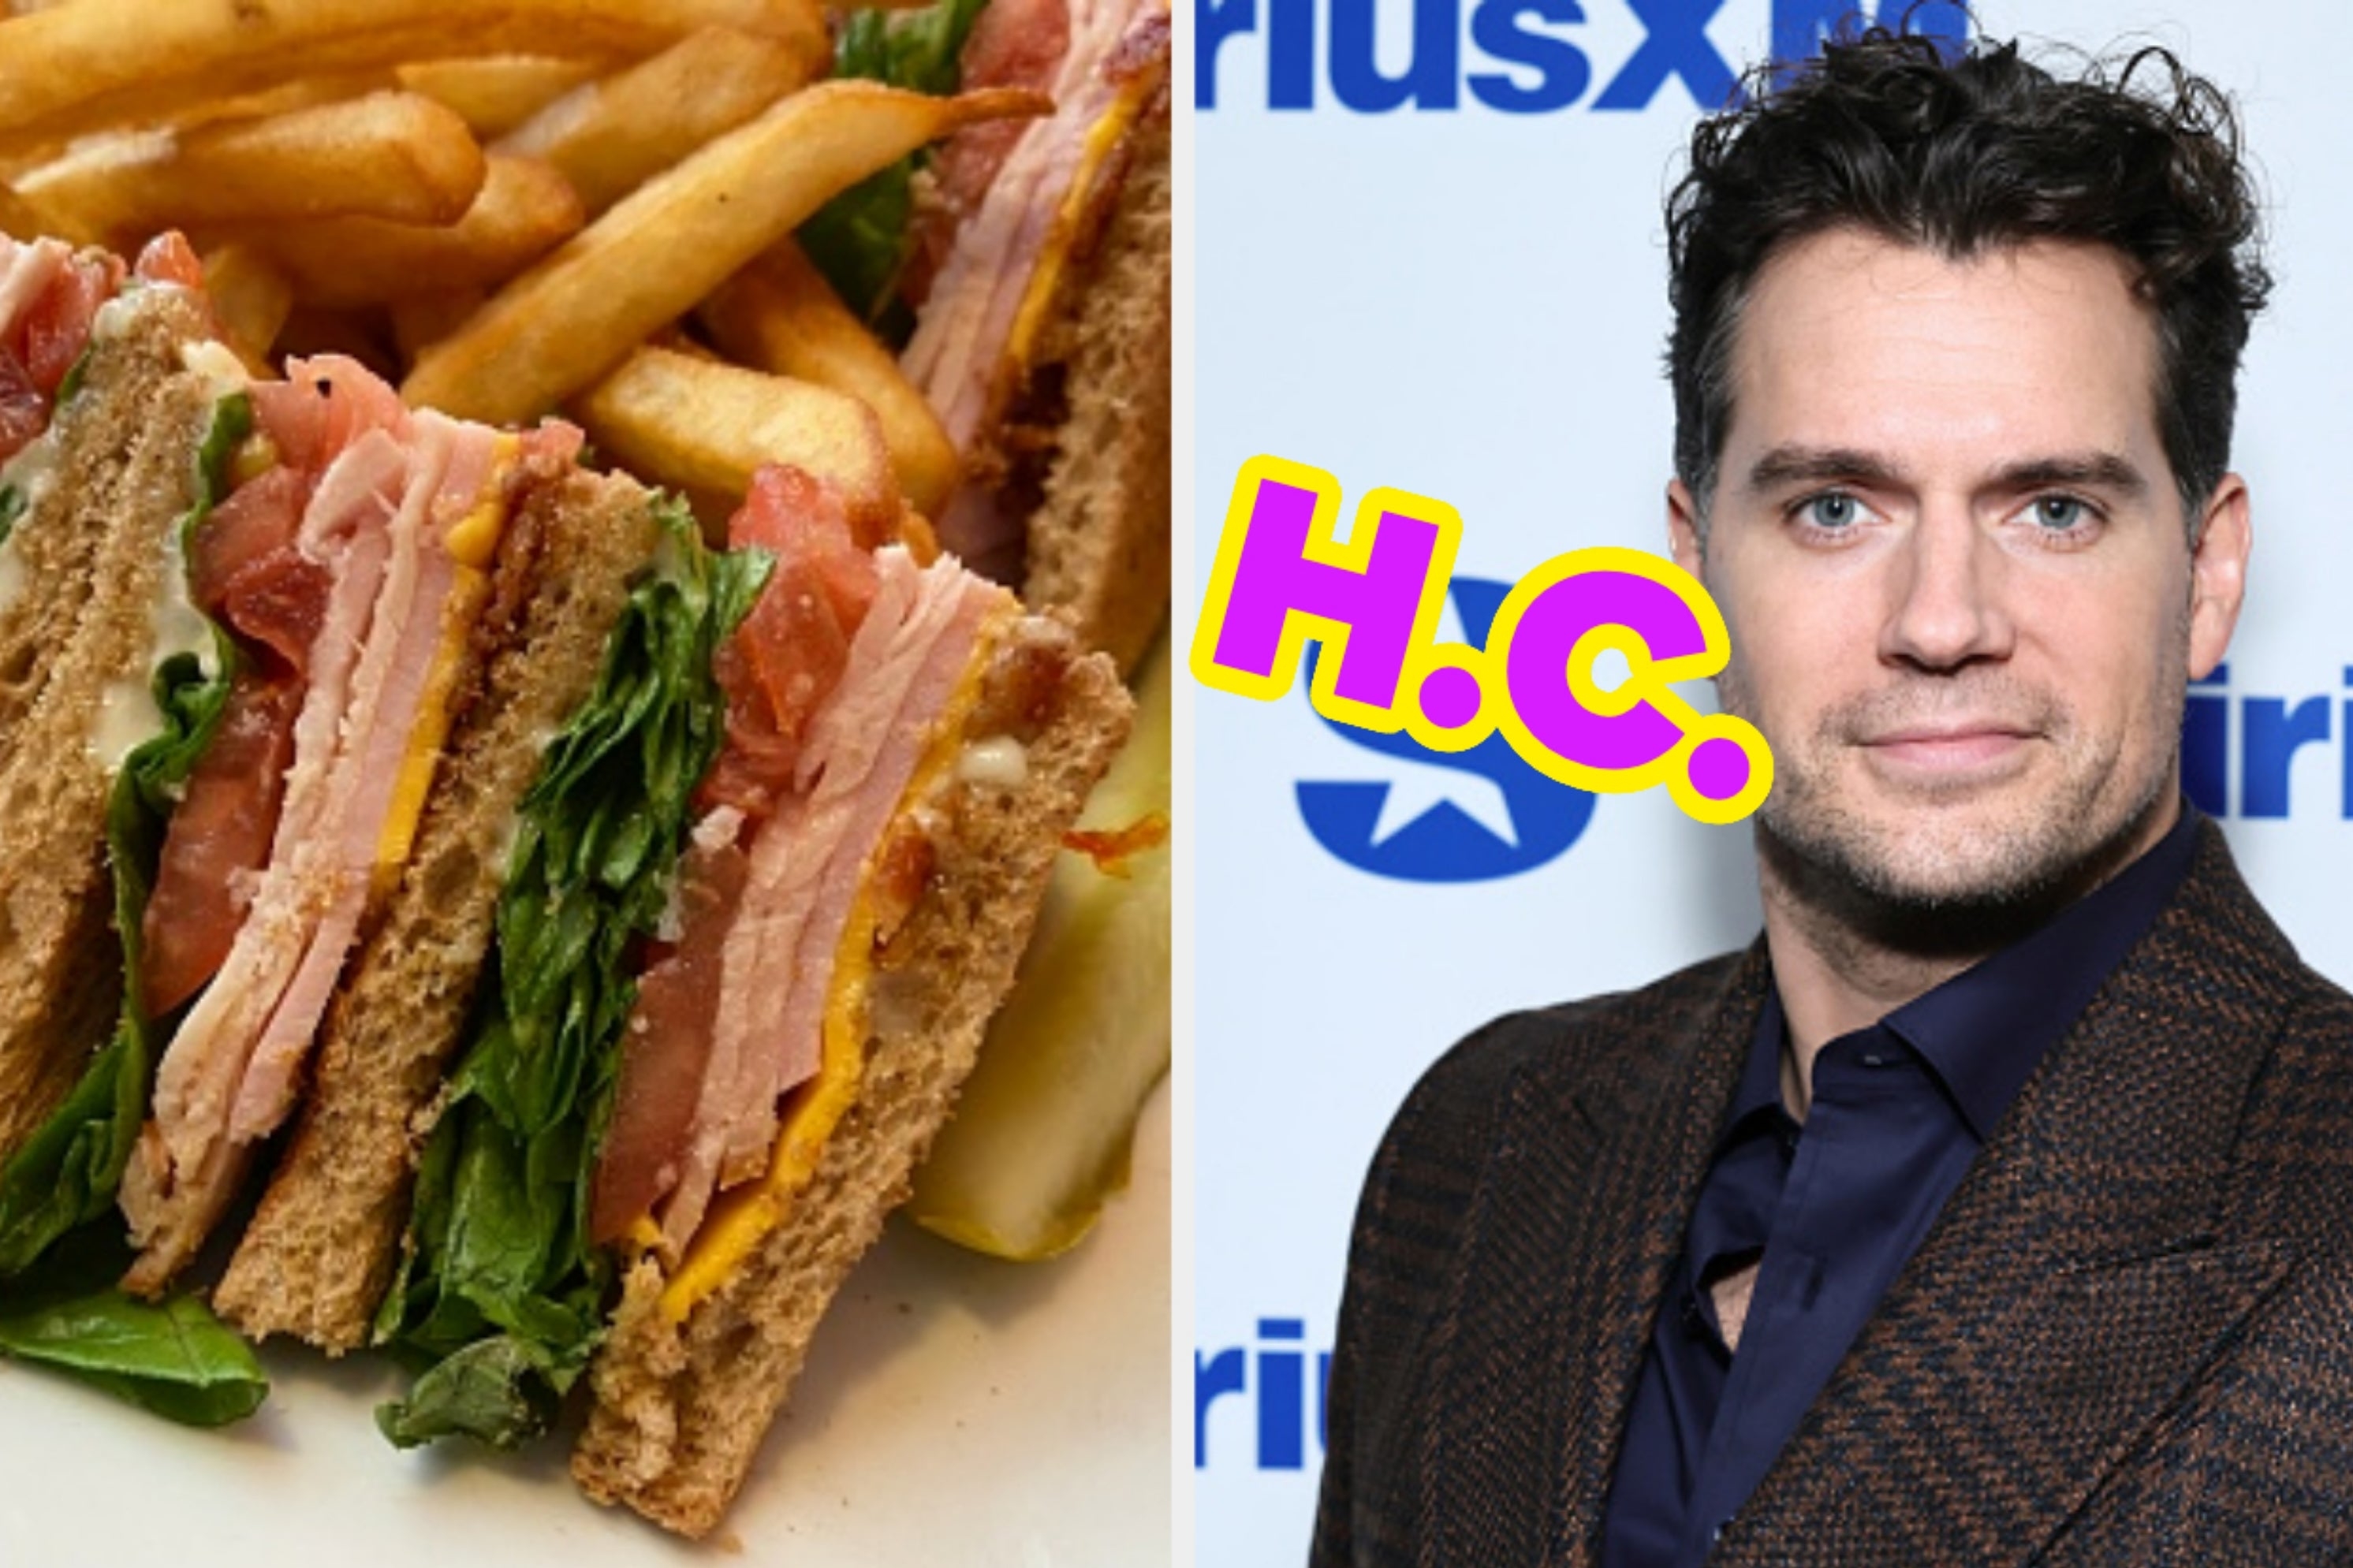 On the left, club sandwich next to fries, and on the right, Henry Cavill with H.C. typed next to his face